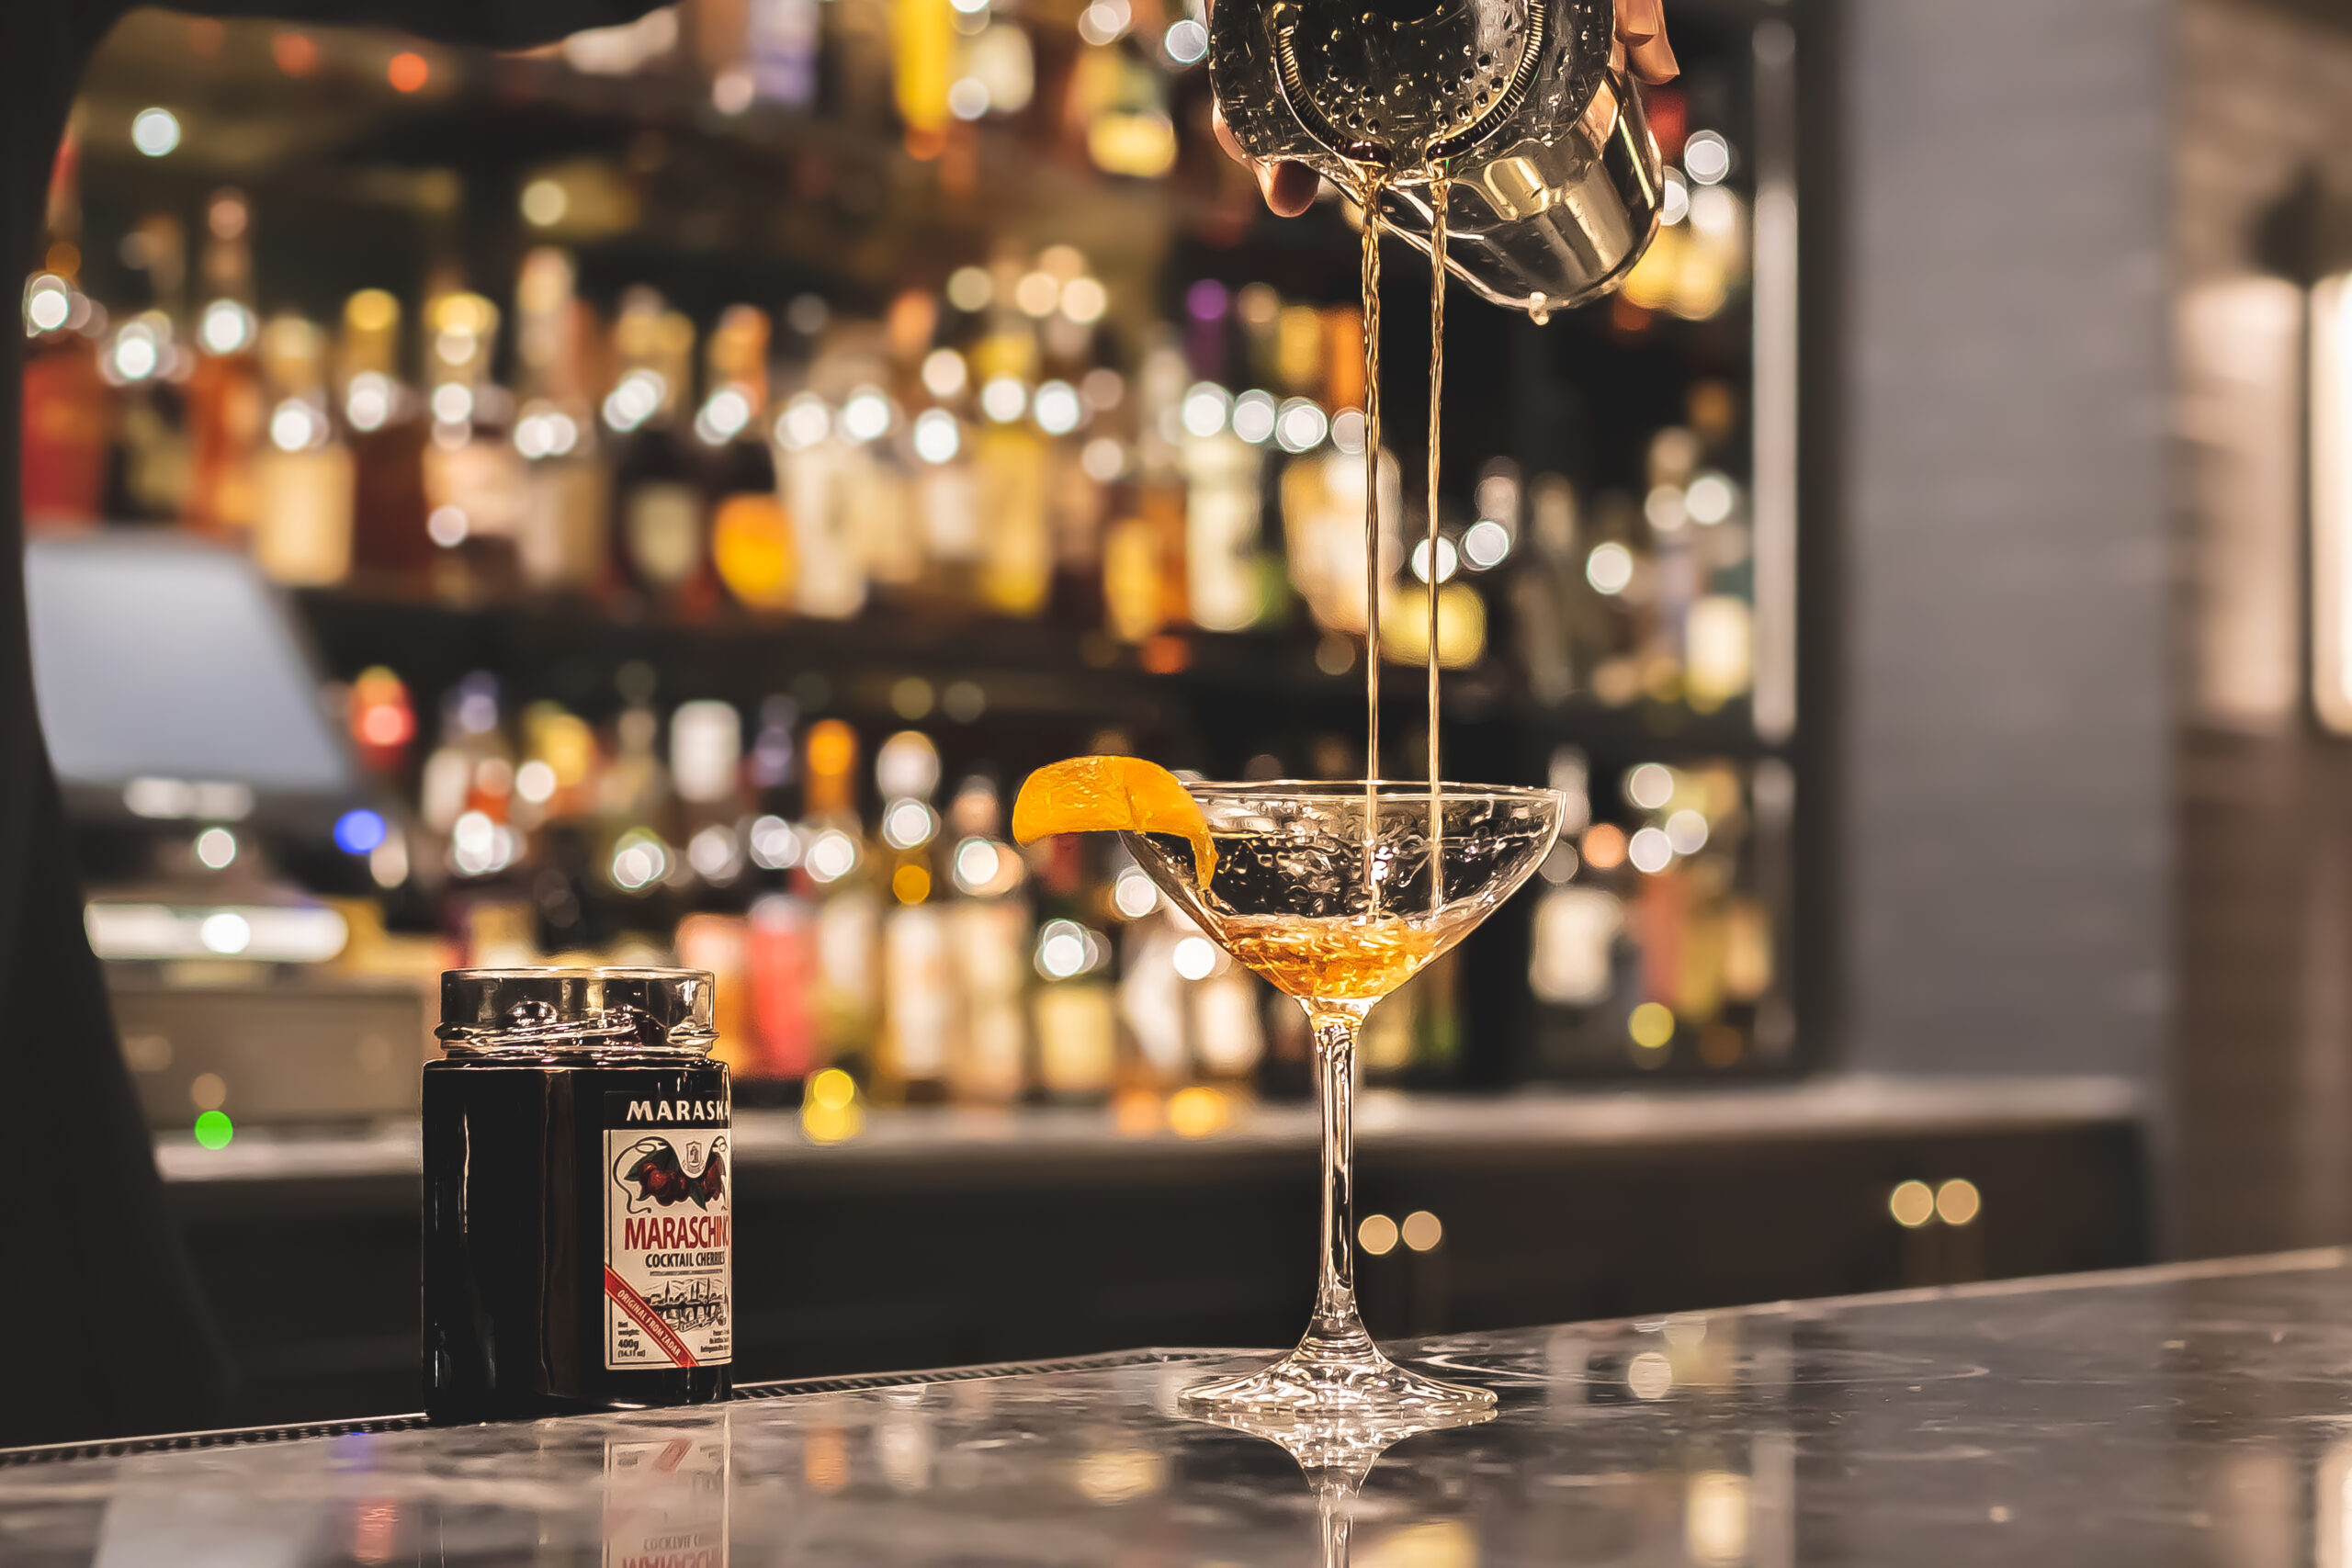 Whiskey by John Howie is Bellevue’s Destination for Must-Sip Events